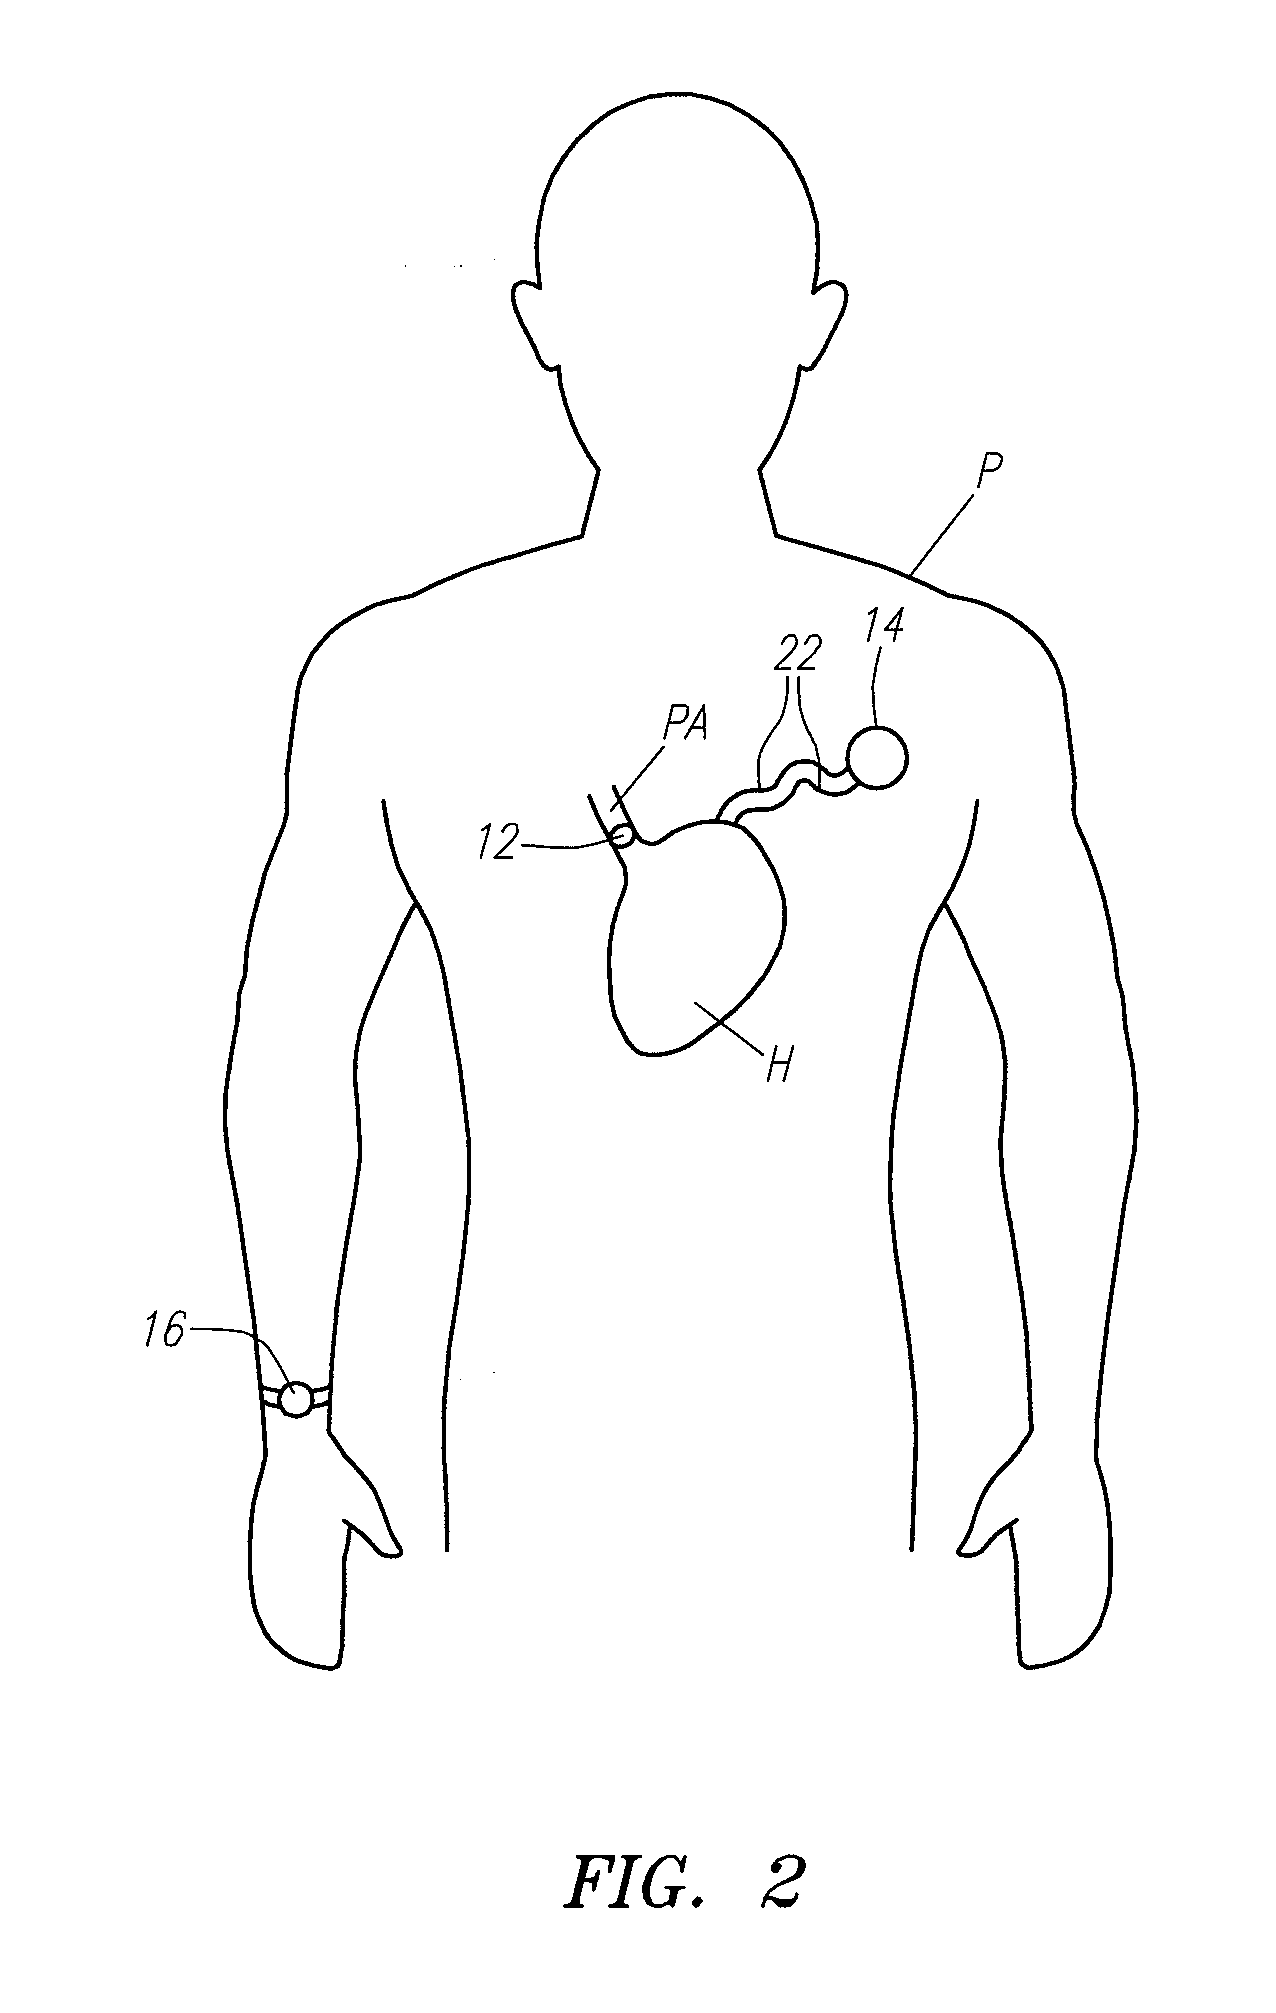 Body attachable unit in wireless communication with implantable devices